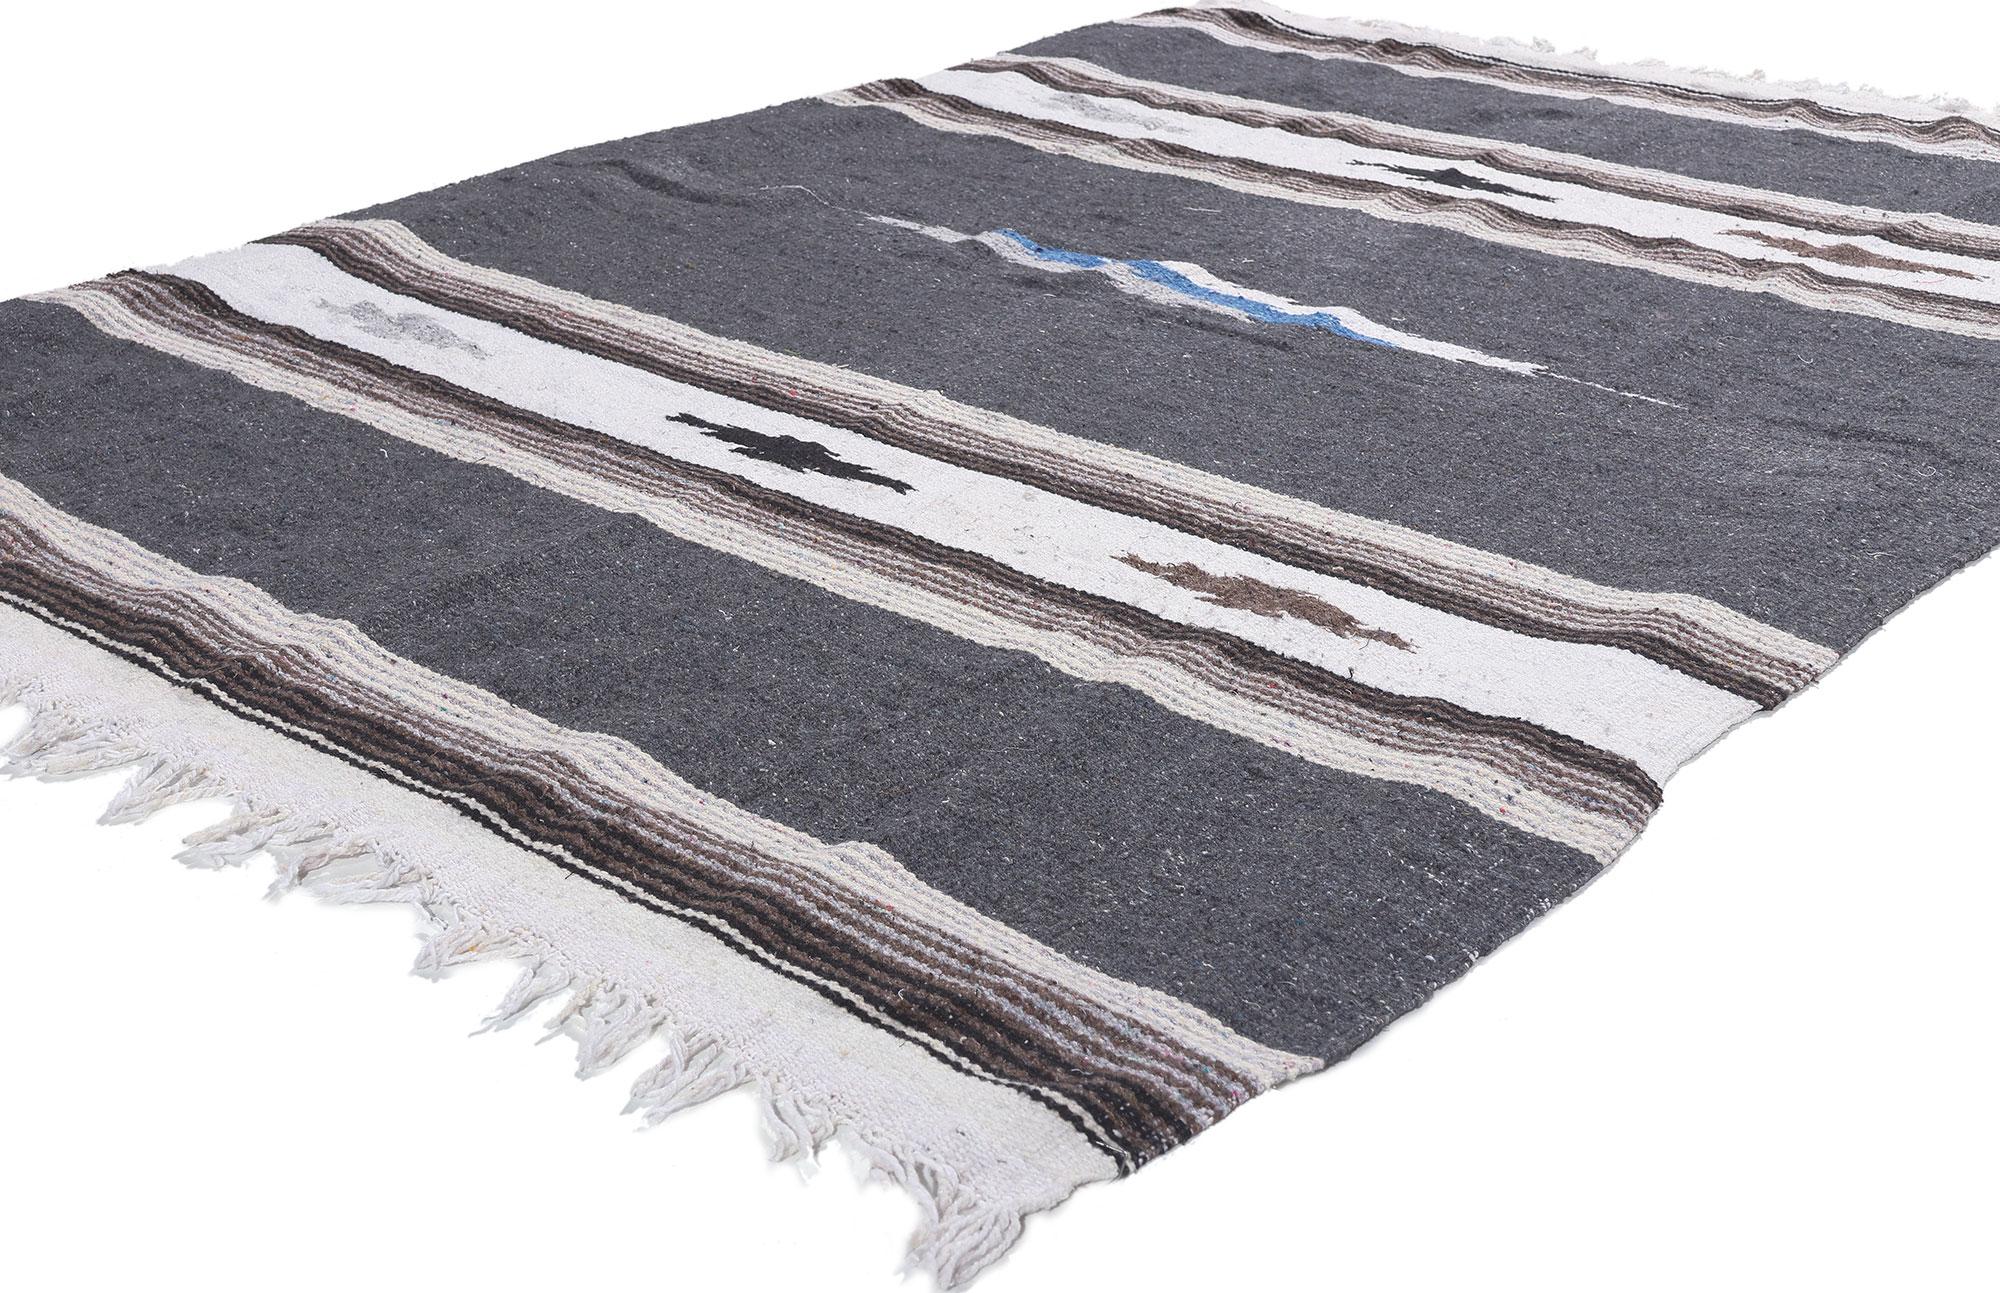 78551 Vintage Mexican Serape Blanket Kilim Rug, 04'05 x 06'04.
Emanating Southwest style and rustic sensibility, this handwoven Mexican Serapi kilim rug is a captivating vision of woven beauty. The eye-catching geometric design and neutral colorway